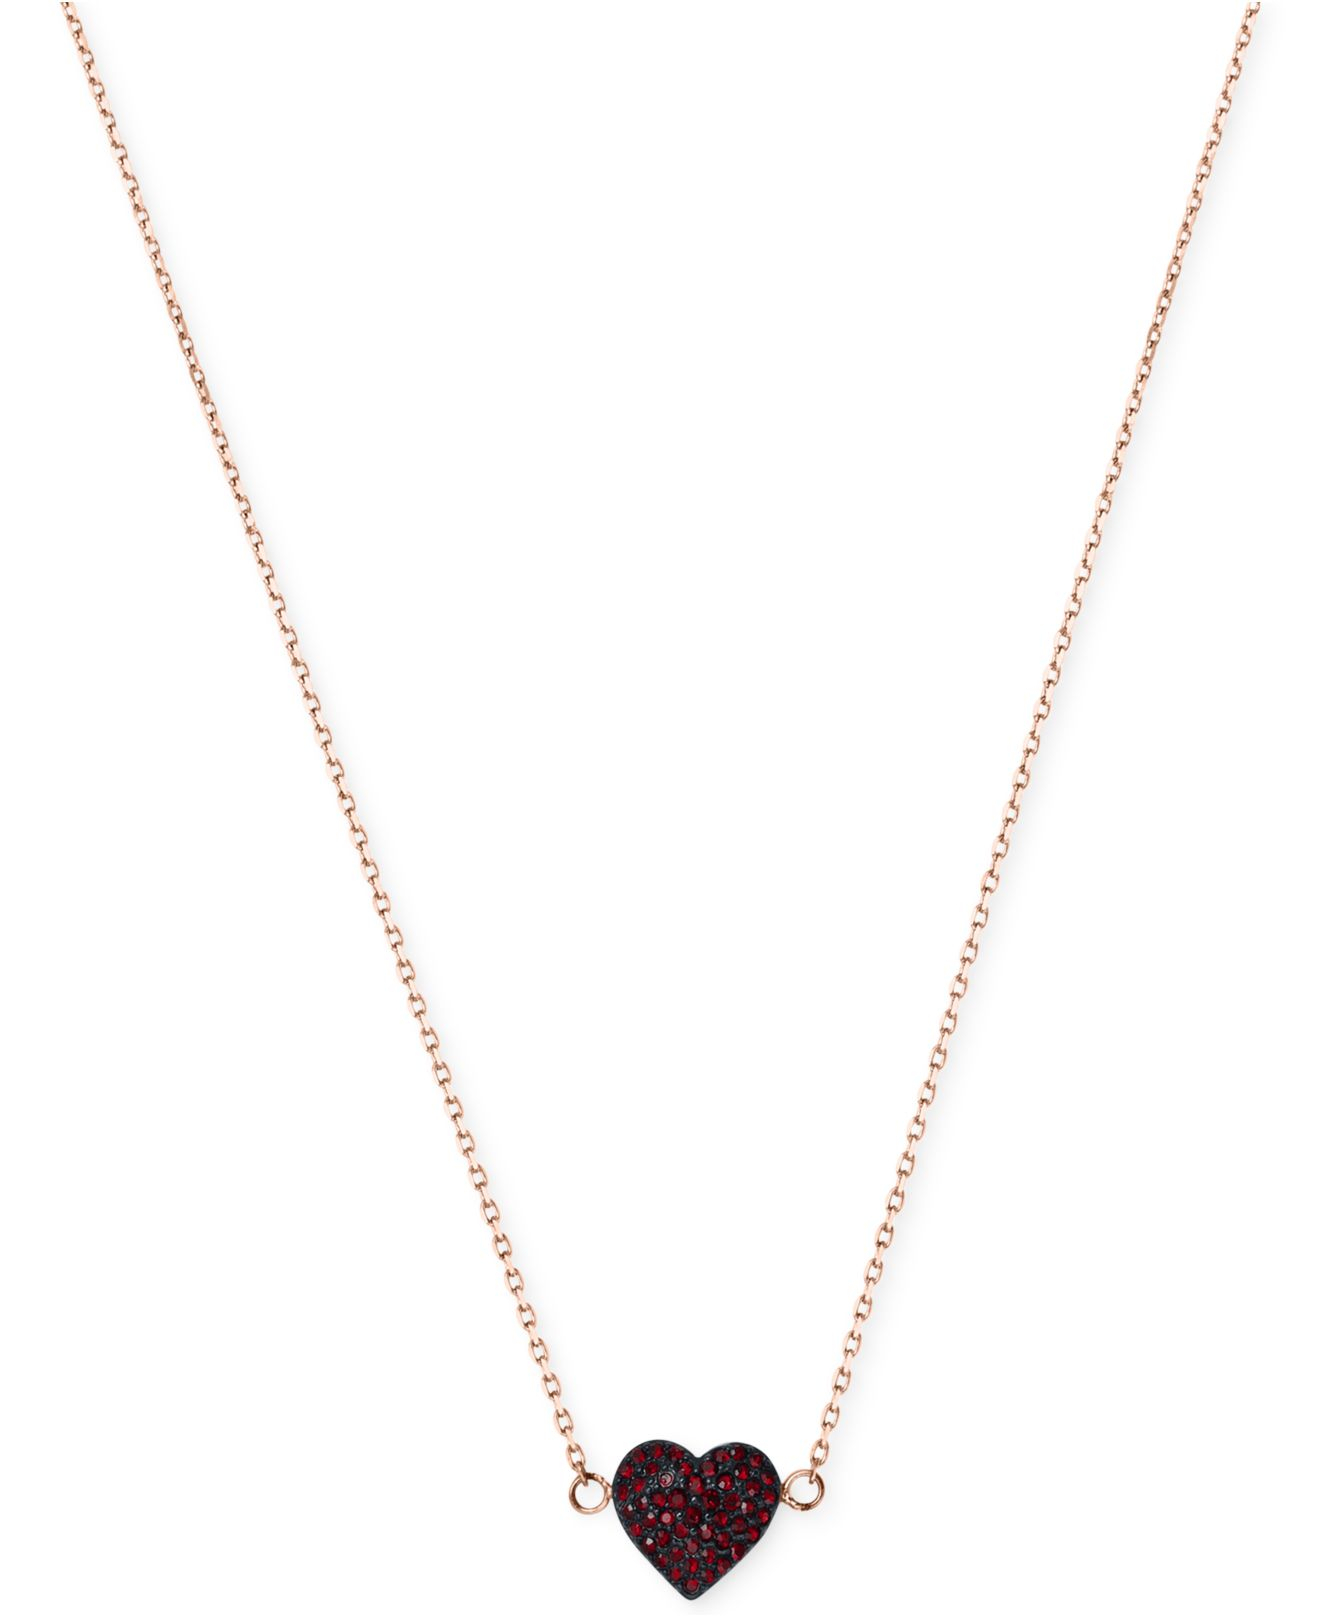 Precious Metal-Plated Sterling Silver Pavé Heart Necklace | Michael Kors